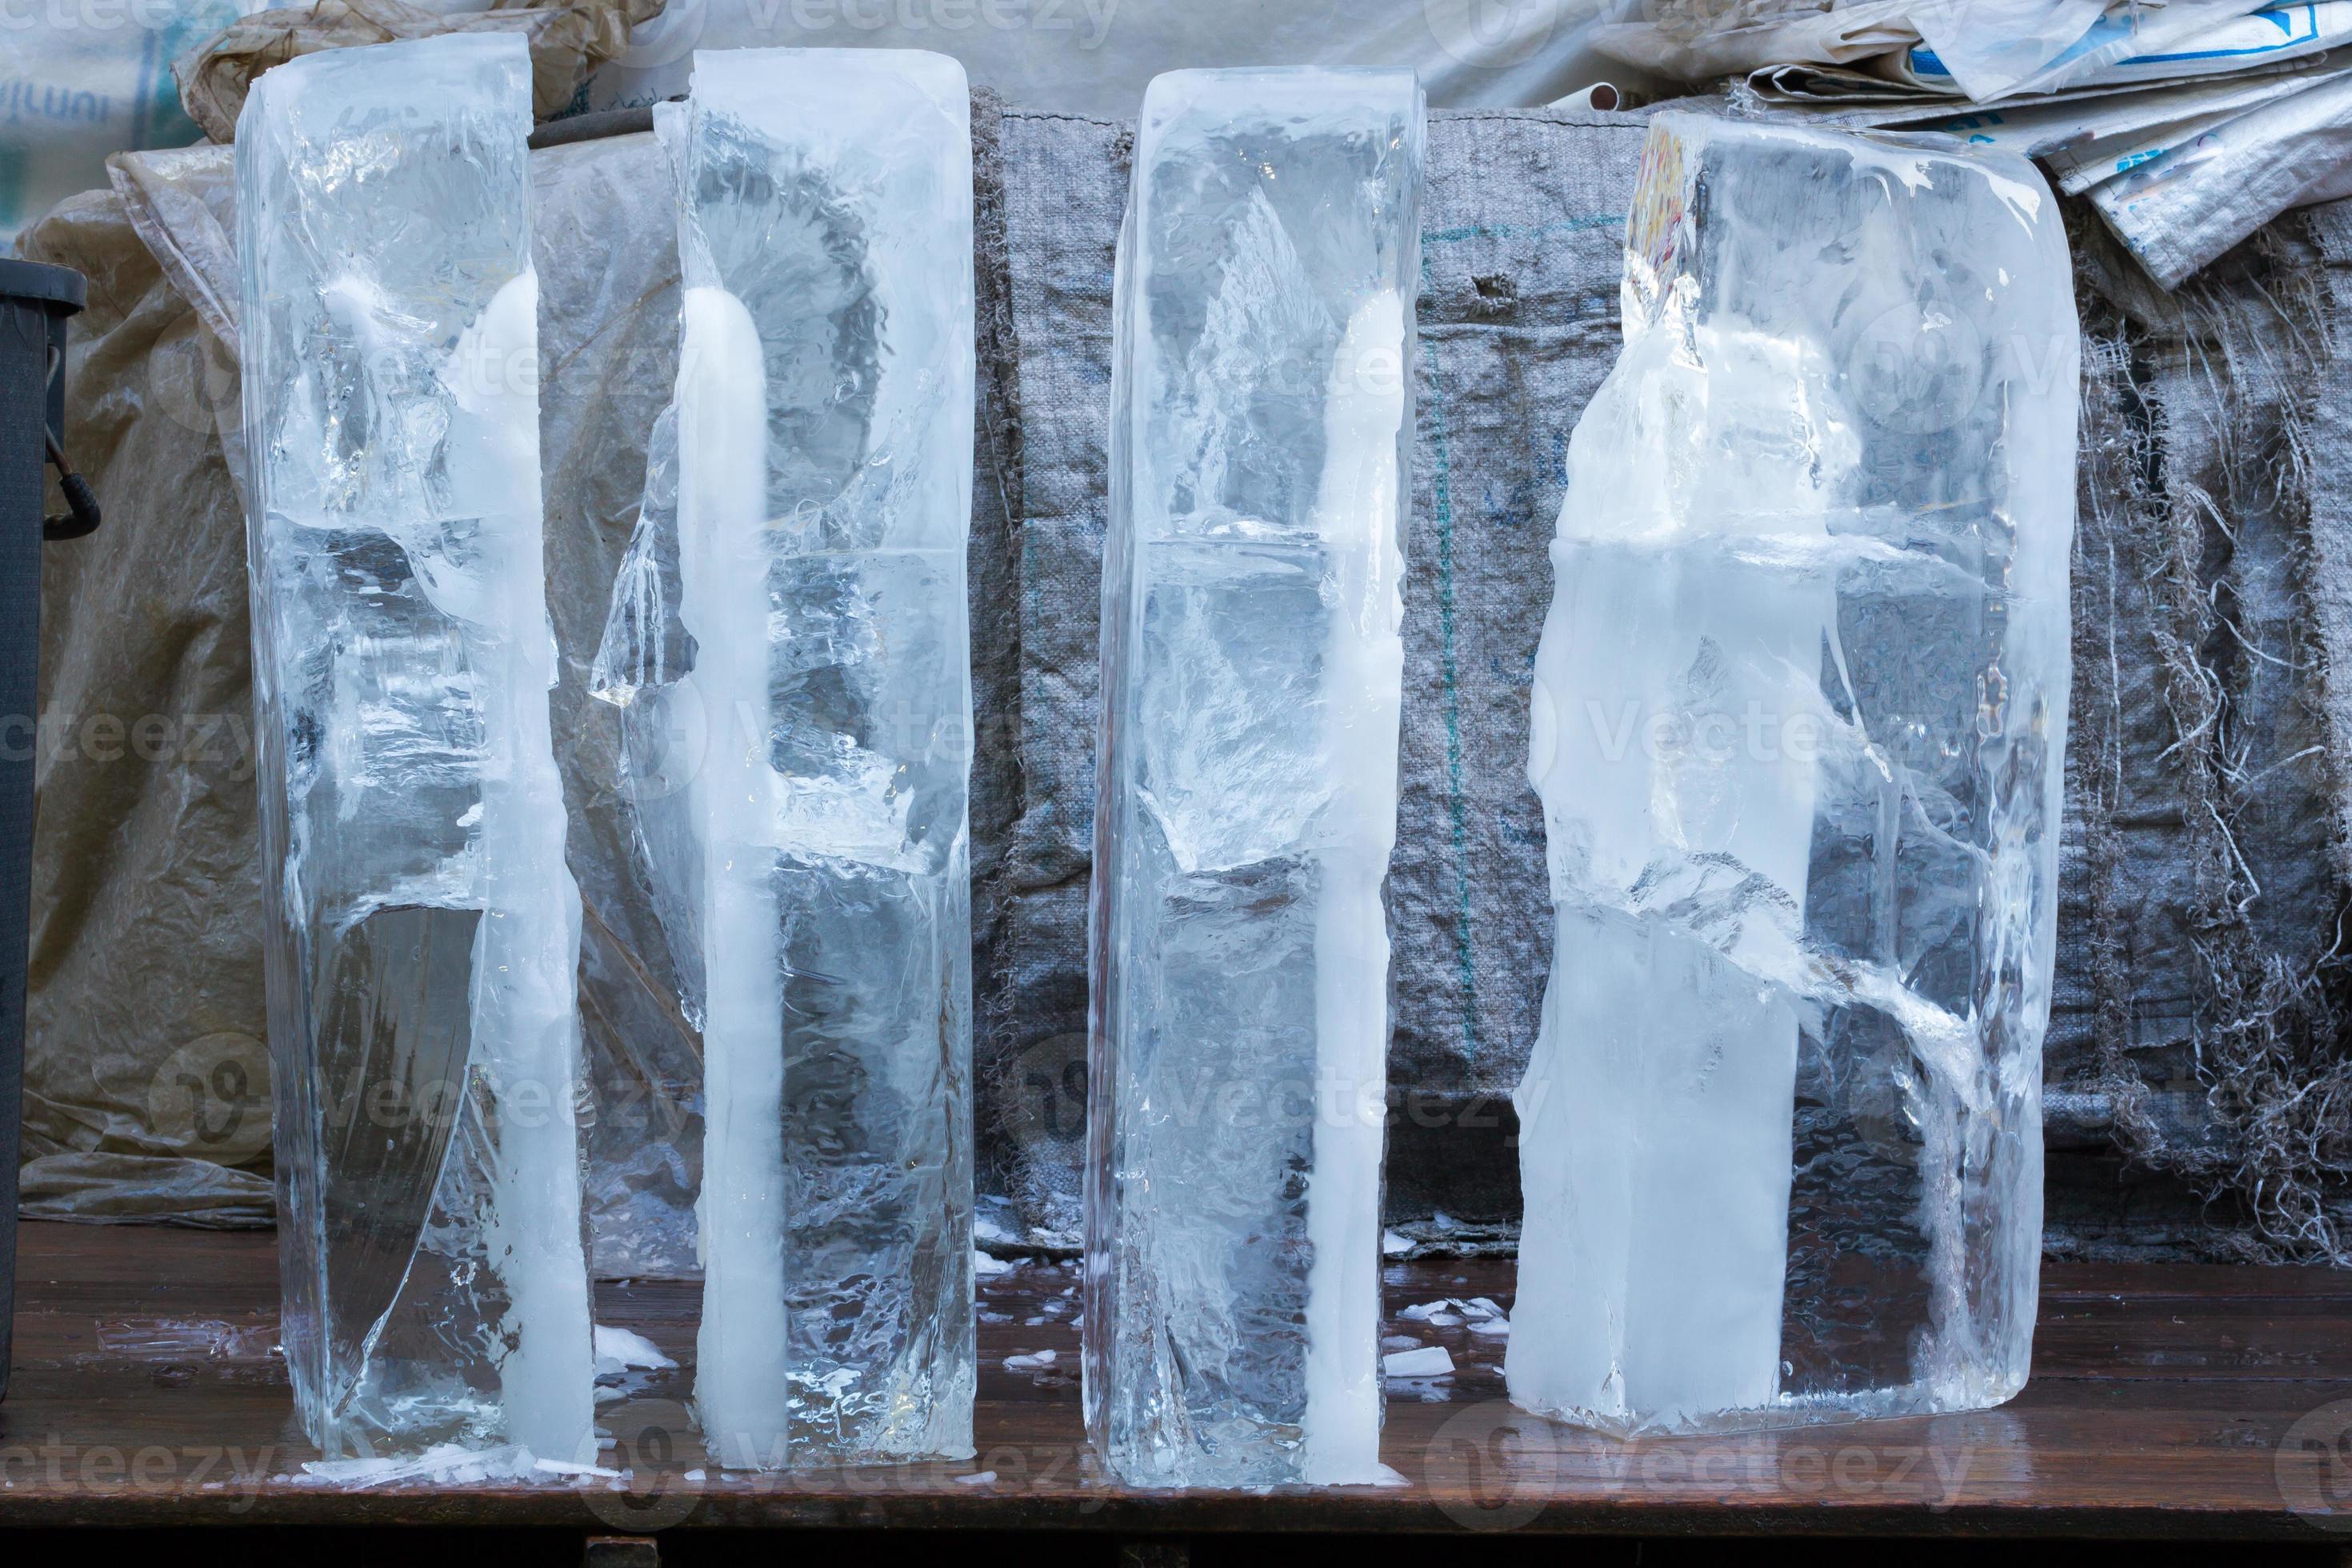 https://static.vecteezy.com/system/resources/previews/003/088/900/large_2x/big-ice-cubes-in-thai-market-for-sale-photo.jpg